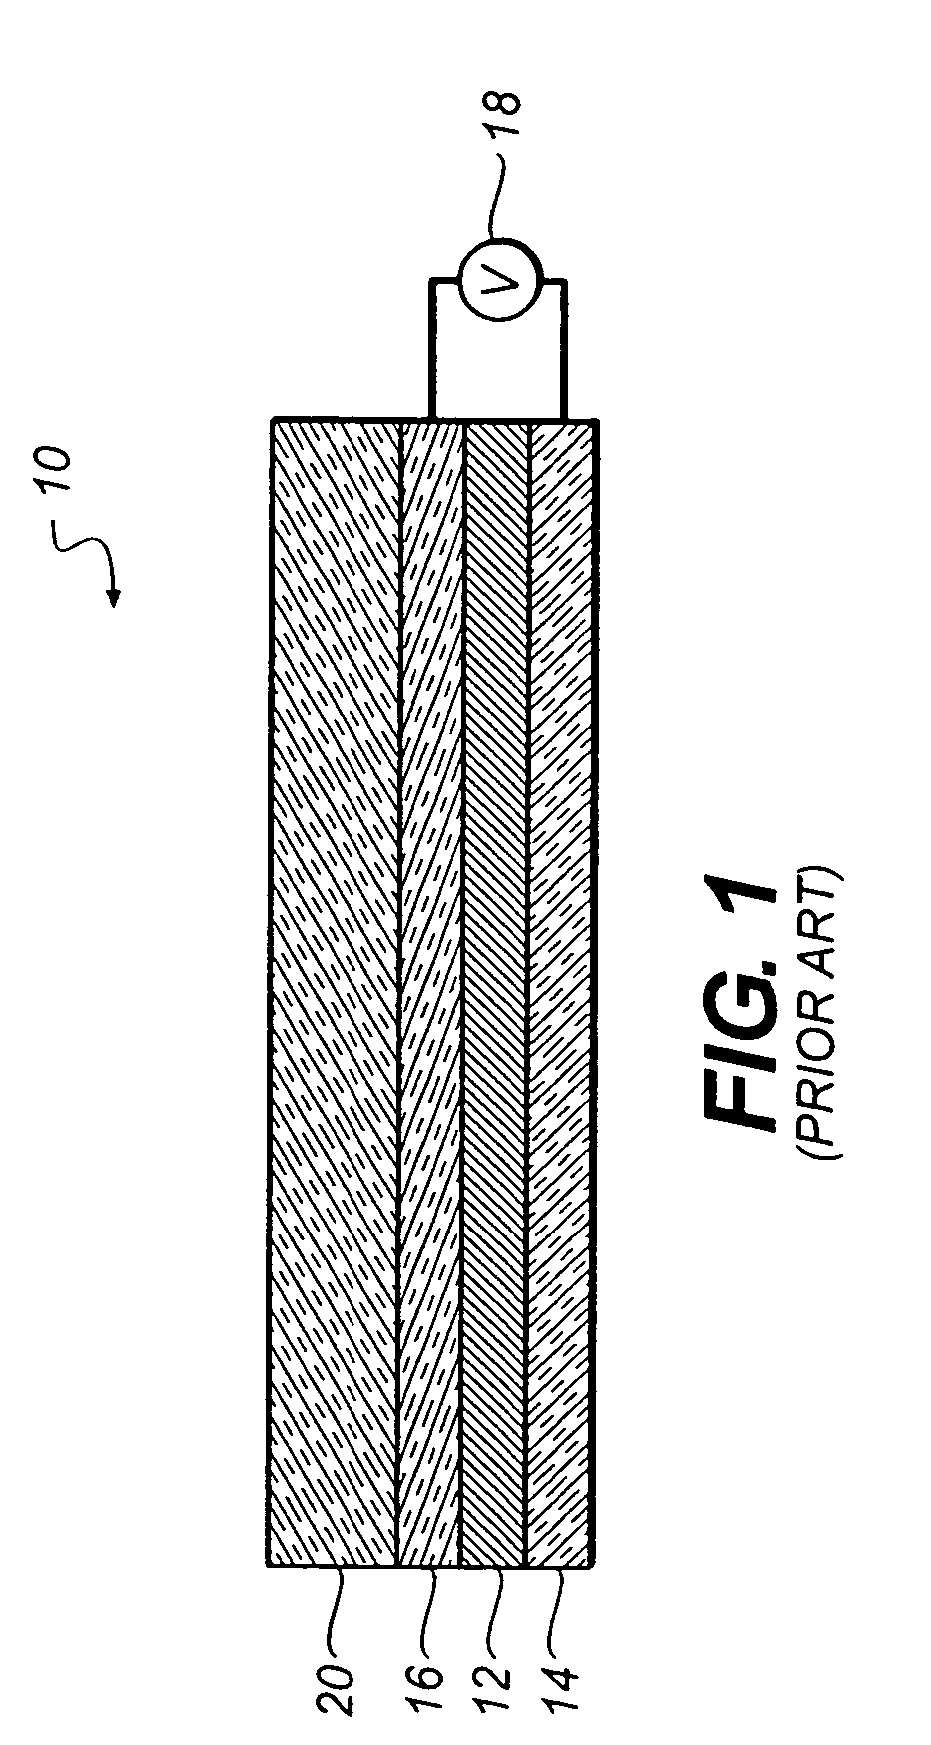 Lighting apparatus with flexible OLED area illumination light source and fixture